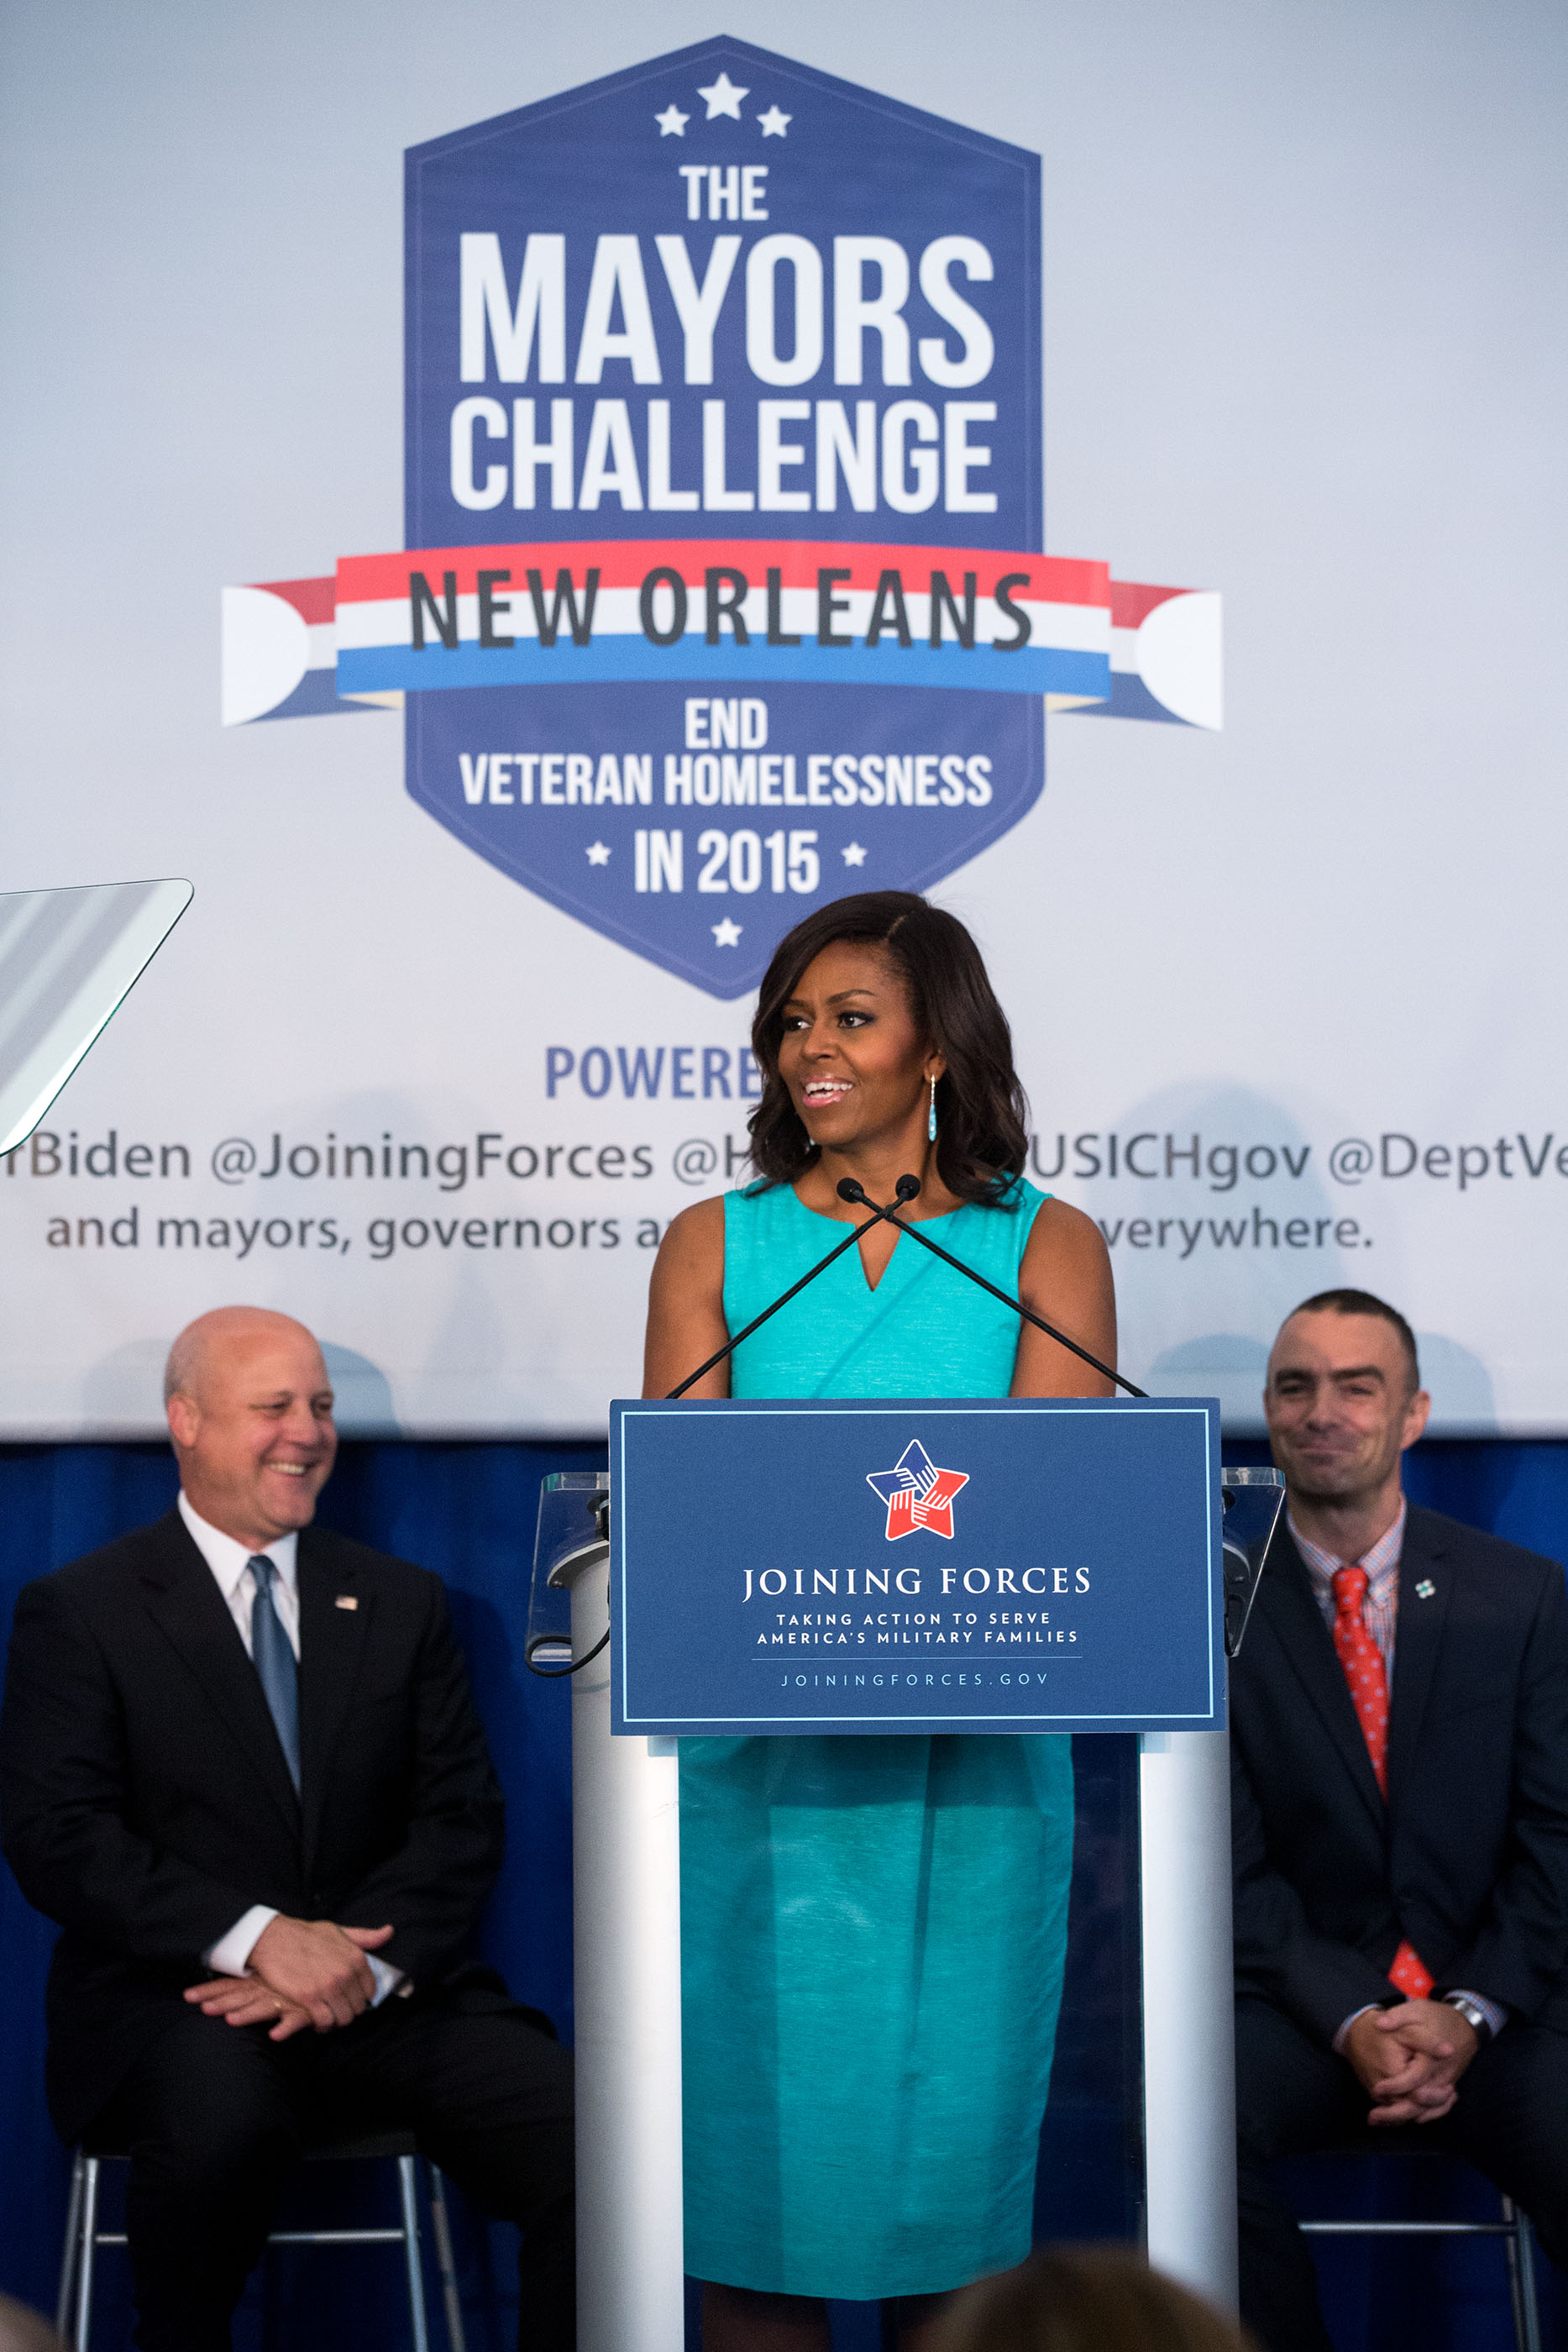 The First Lady joins Mayor Mitch Landrieu and Dylan Tete for the “Mayor's Challenge to End Veteran Homelessness” event in New Orleans, La., April 20, 2015. (Official White House Photo by Amanda Lucidon)